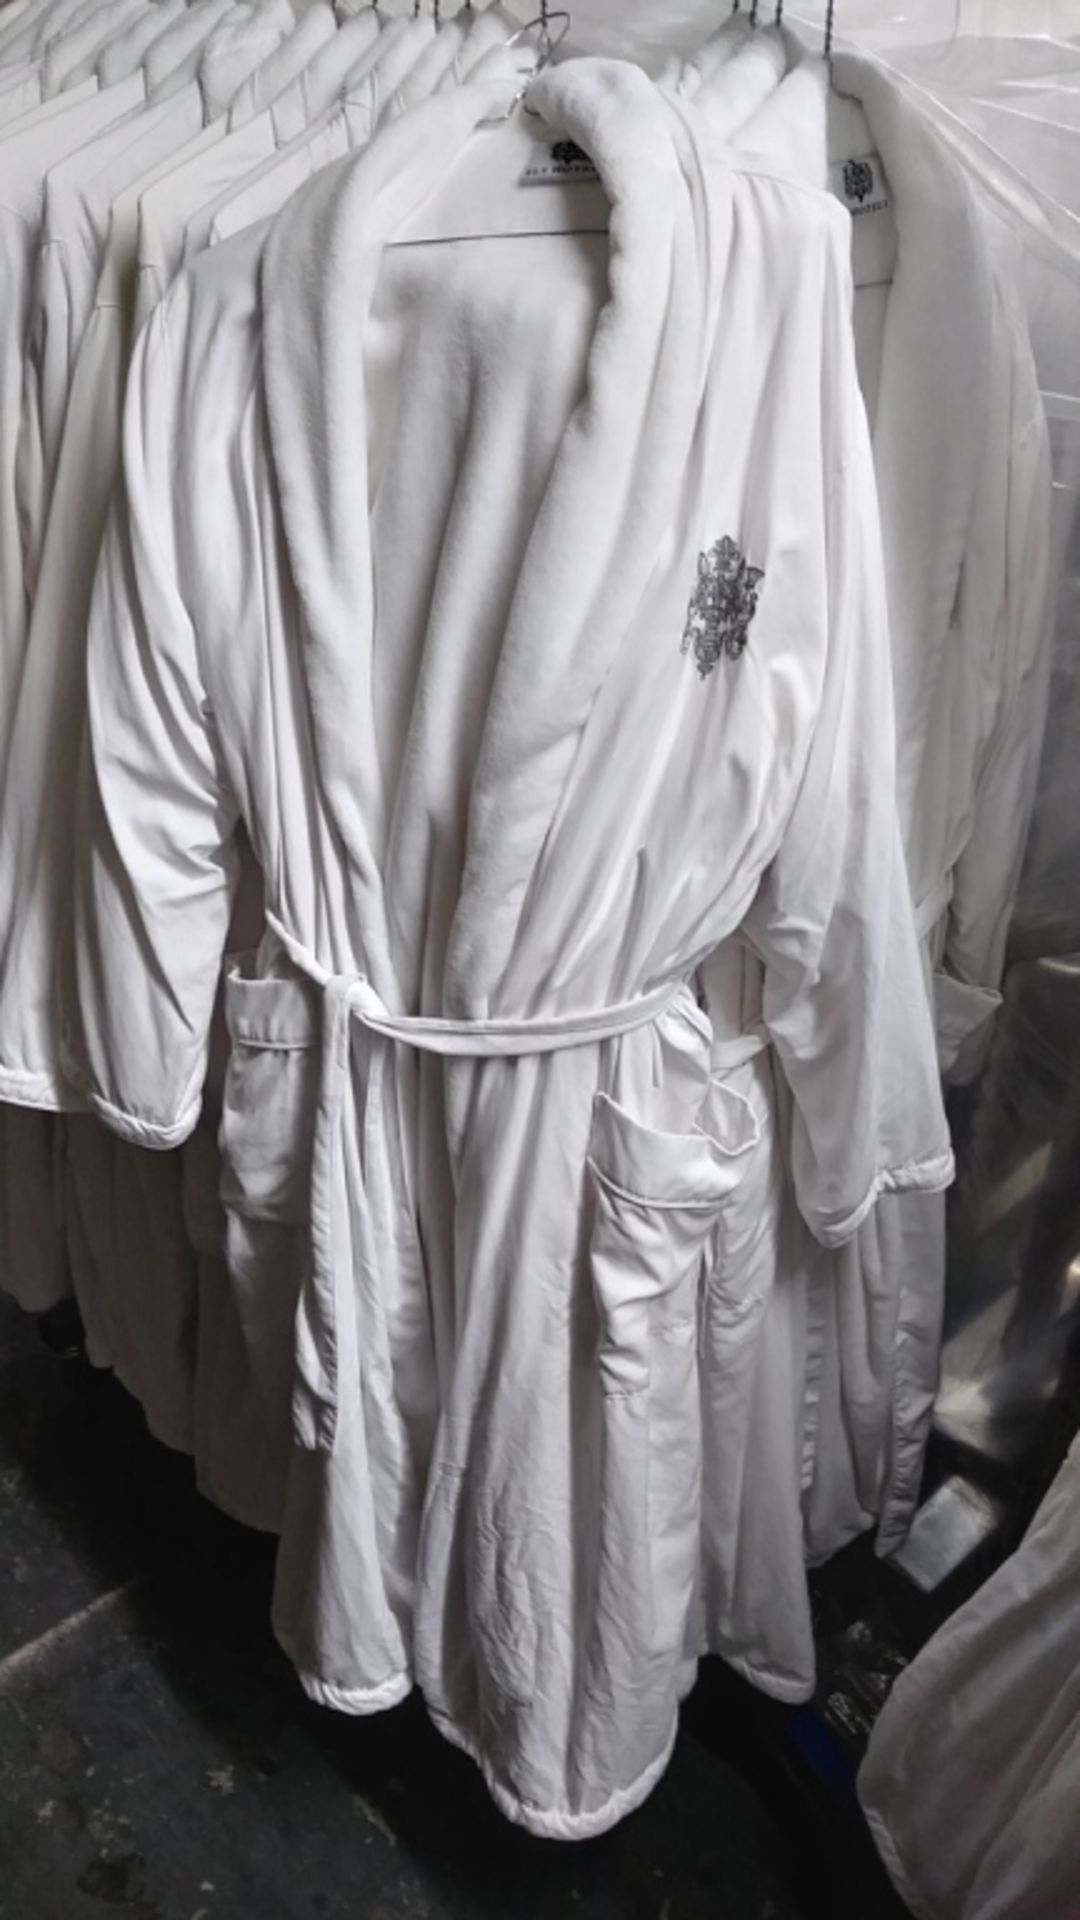 Used White Bath Robes - Assorted Sizes (INCLUDES 25 ROBES)